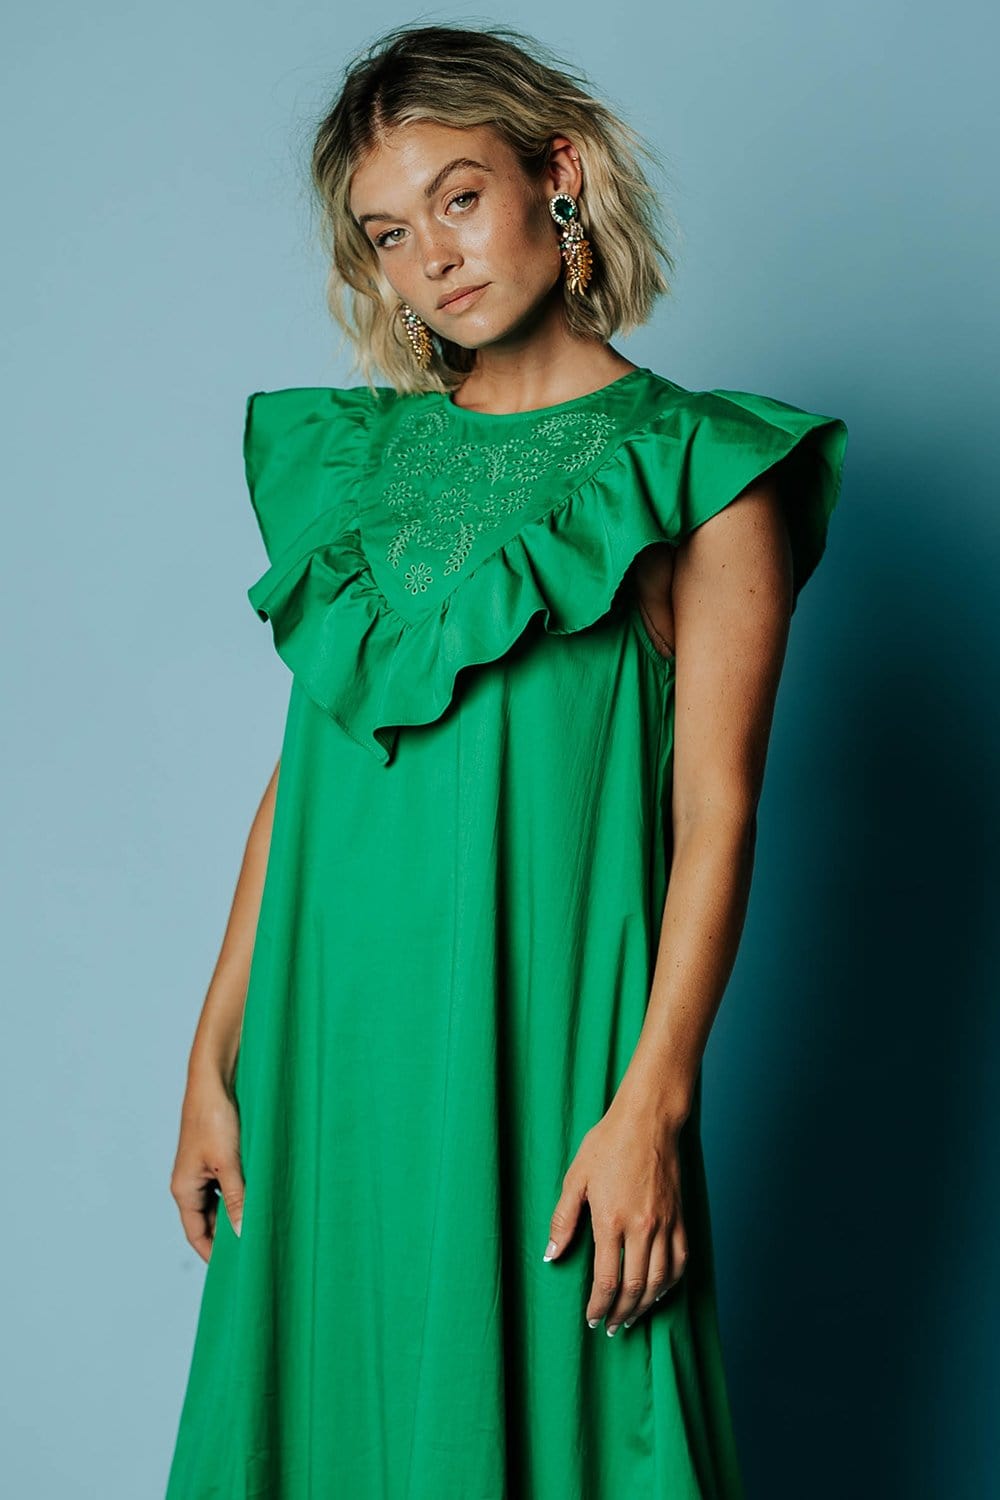 The Brenly Dress in Emerald